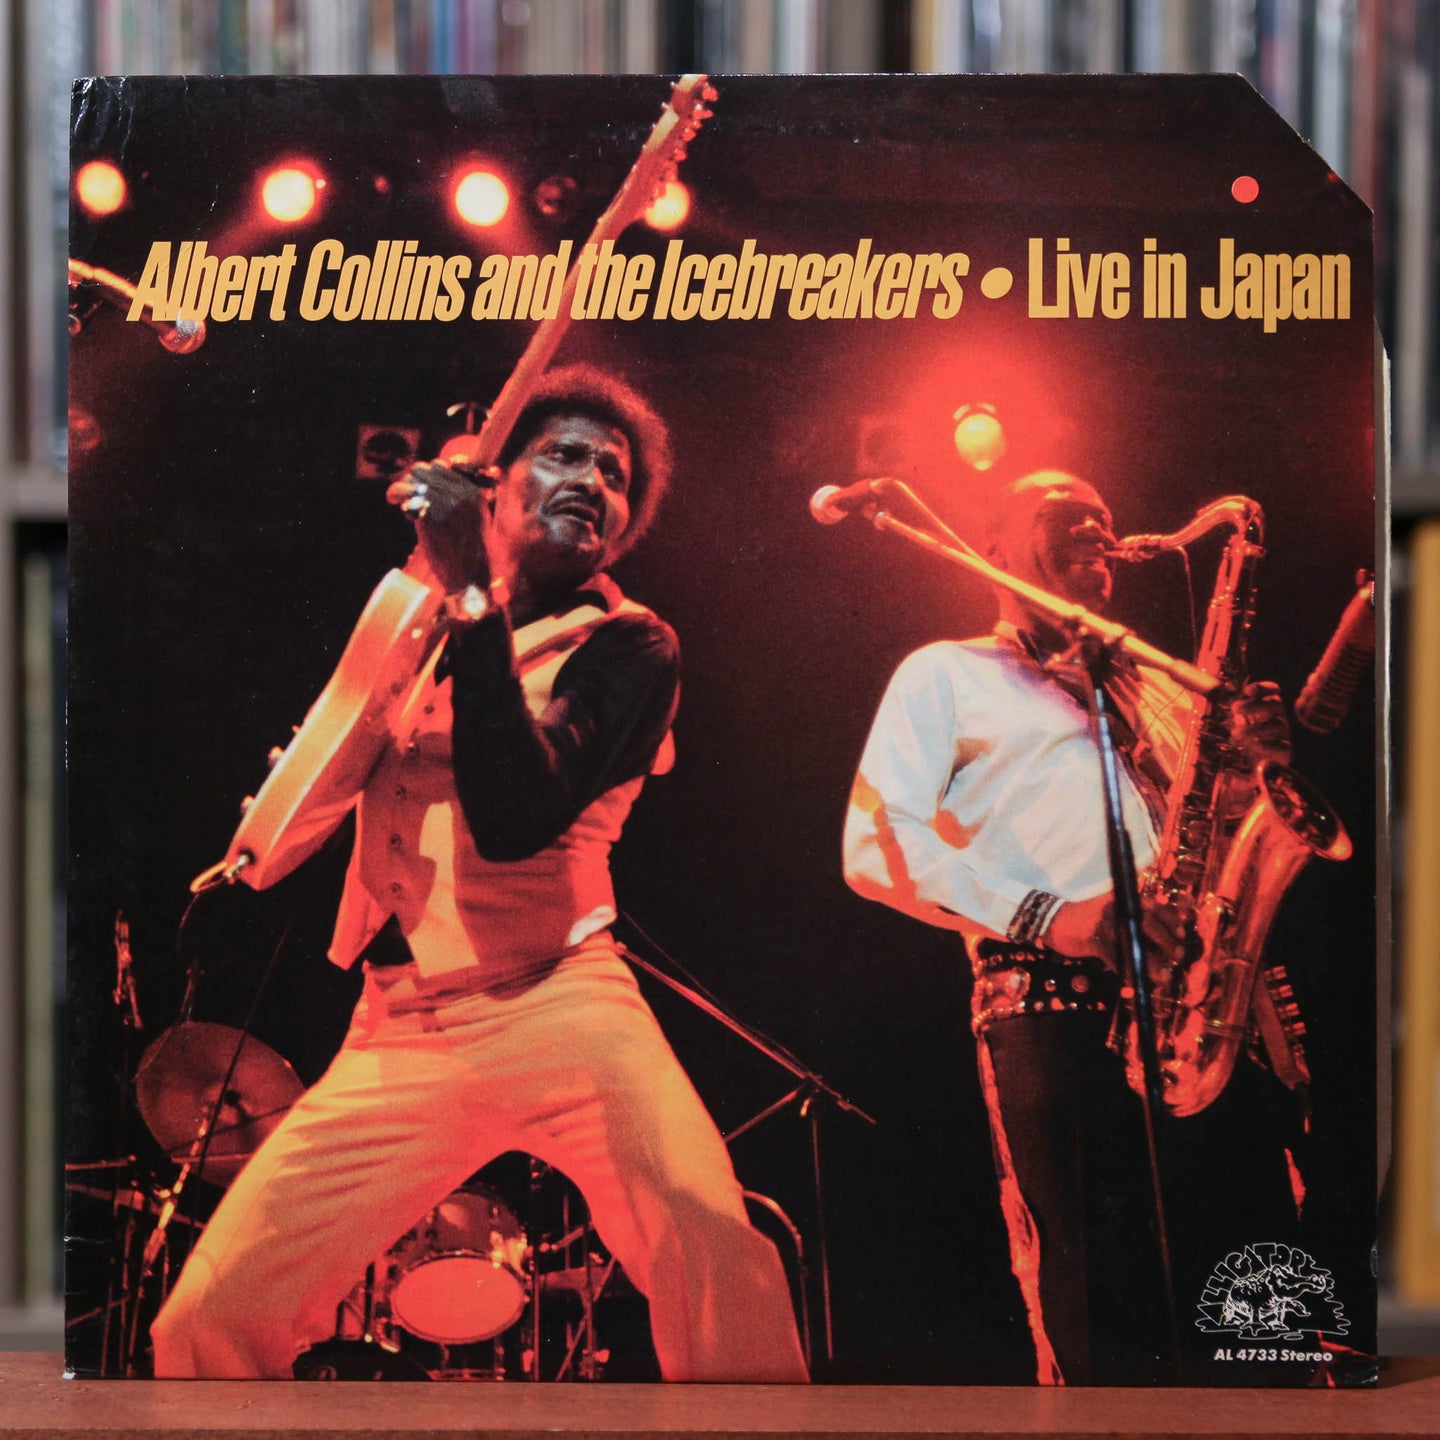 Albert Collins And The Icebreakers - Live In Japan - 1984 Alligator, VG/EX